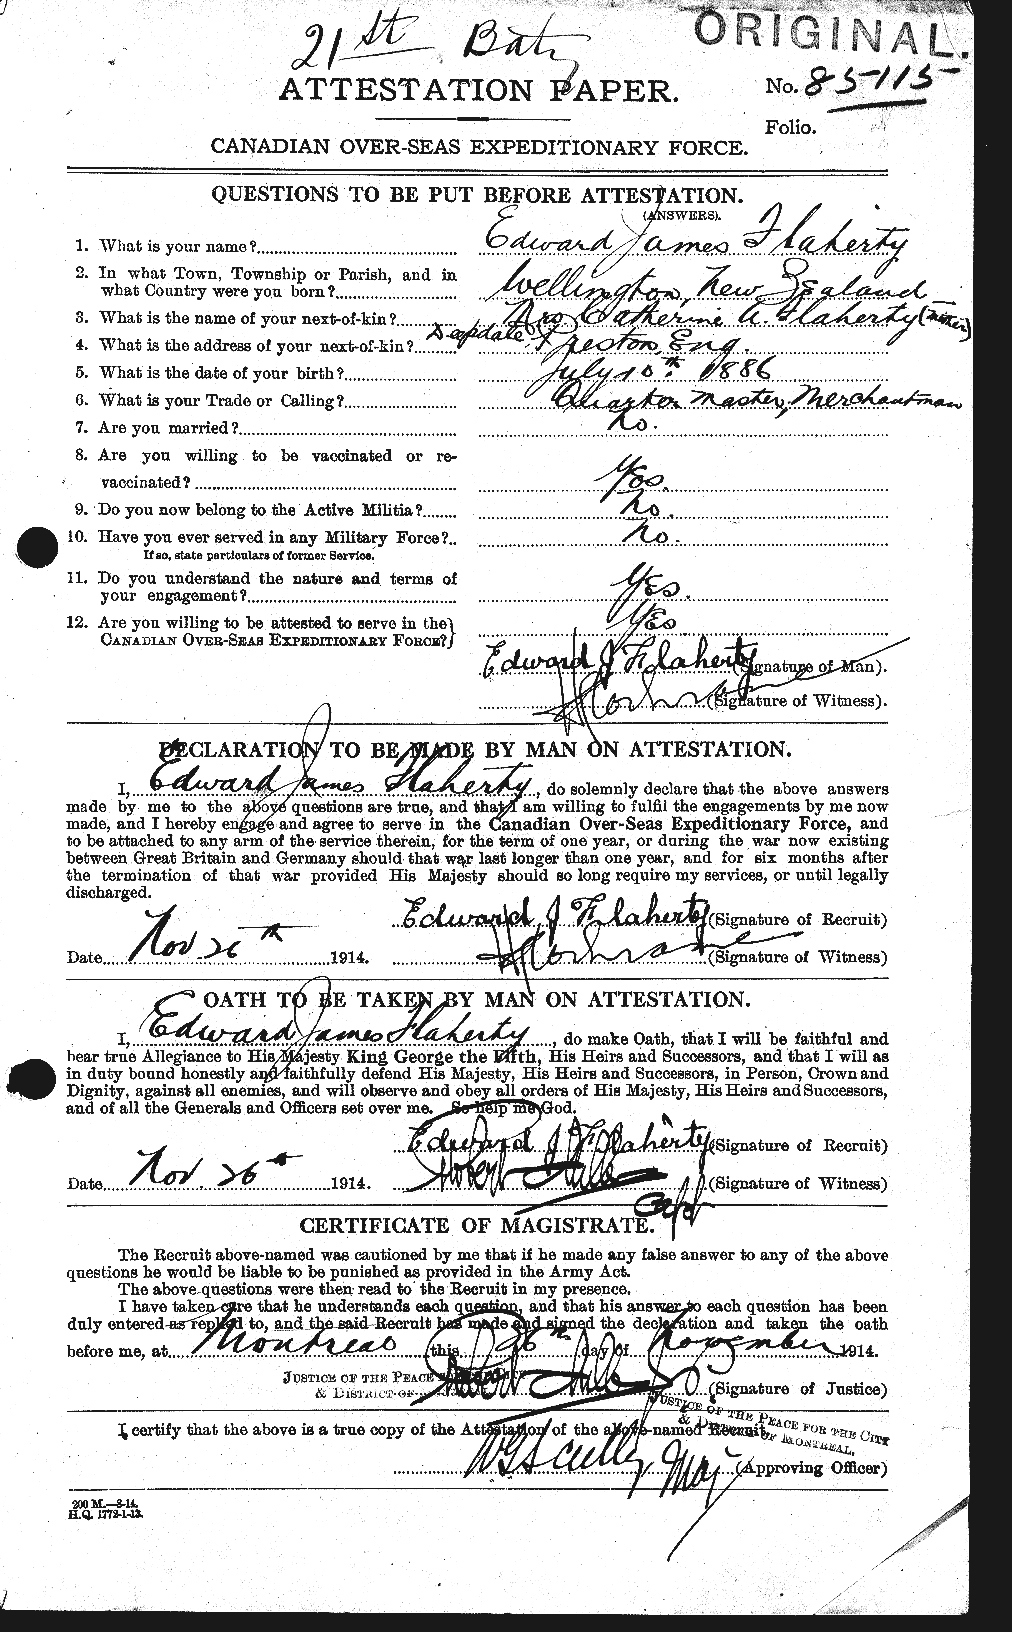 Personnel Records of the First World War - CEF 323349a